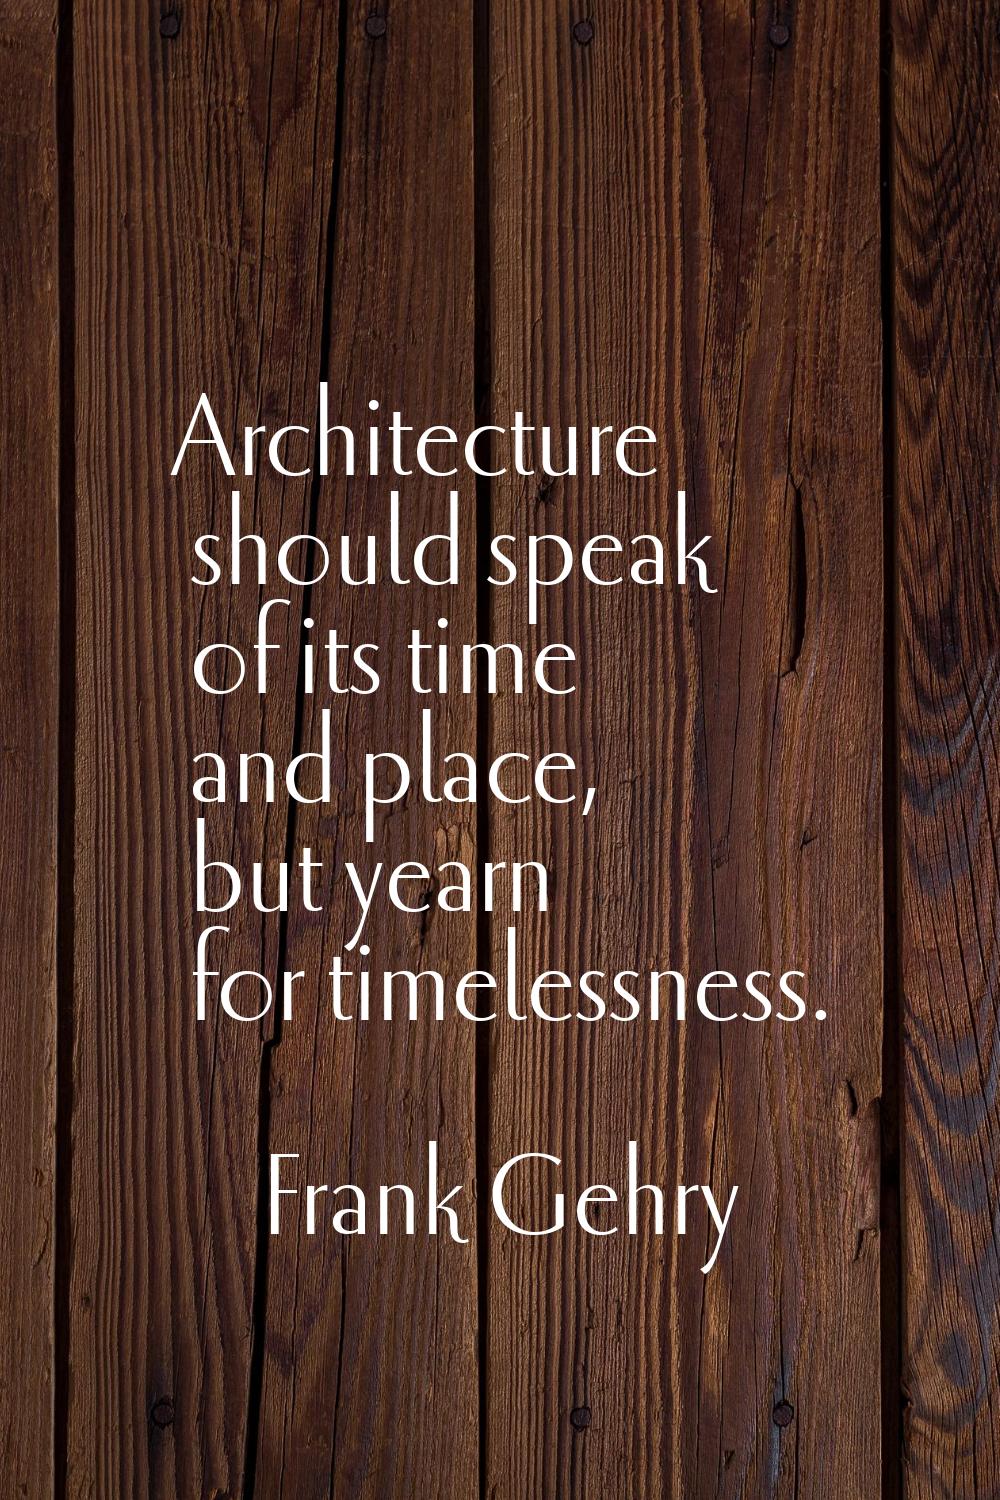 Architecture should speak of its time and place, but yearn for timelessness.